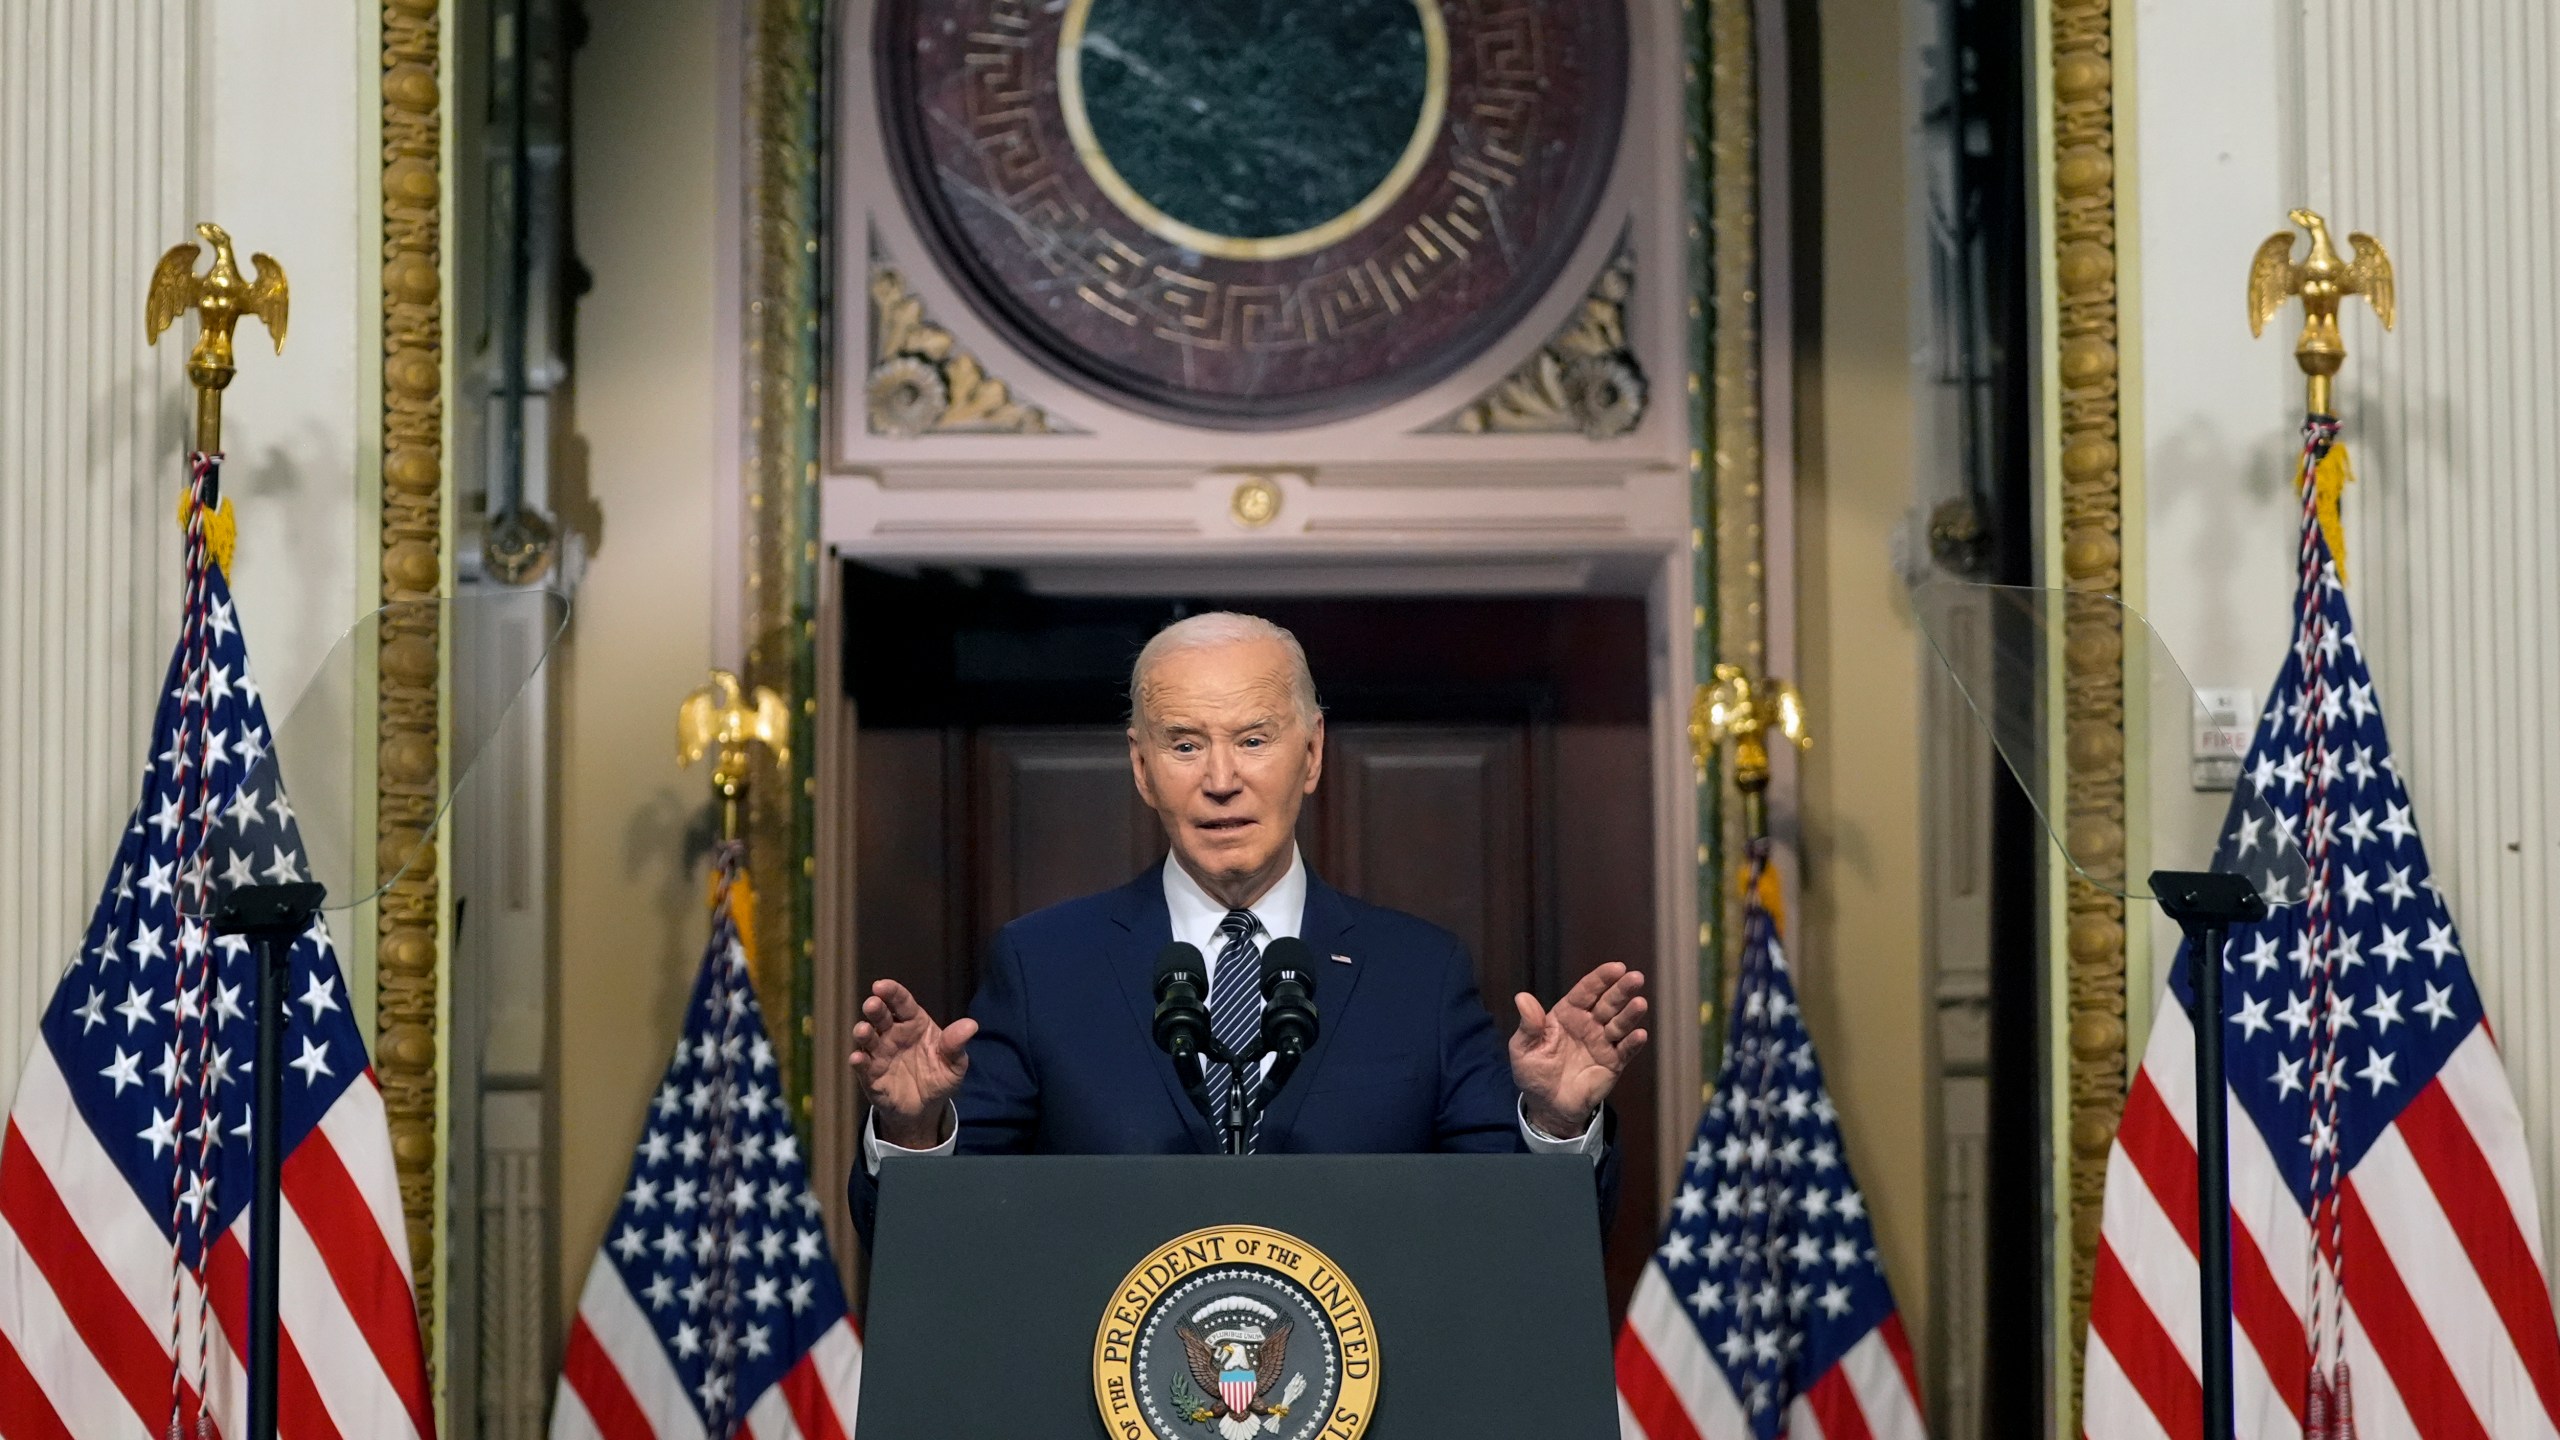 President Joe Biden speaks about lowering health care costs in the Indian Treaty Room at the Eisenhower Executive Office Building on the White House complex in Washington, Wednesday, April 3, 2024. (AP Photo/Mark Schiefelbein)